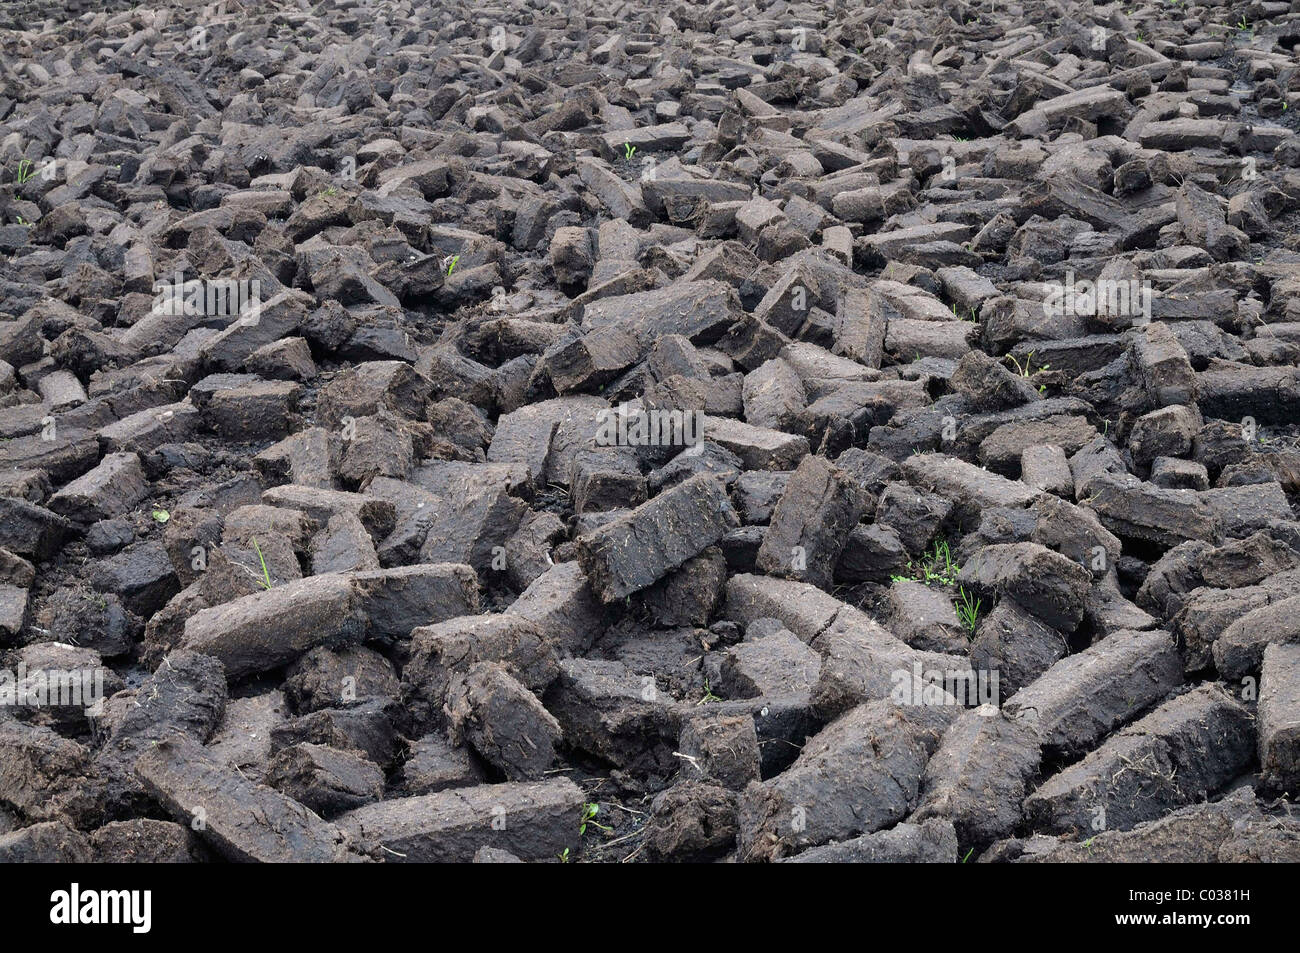 Peat briquettes used for fuel in private homes are dried by the citizens themselves, Birr, Leinster, Republic of Ireland, Europe Stock Photo